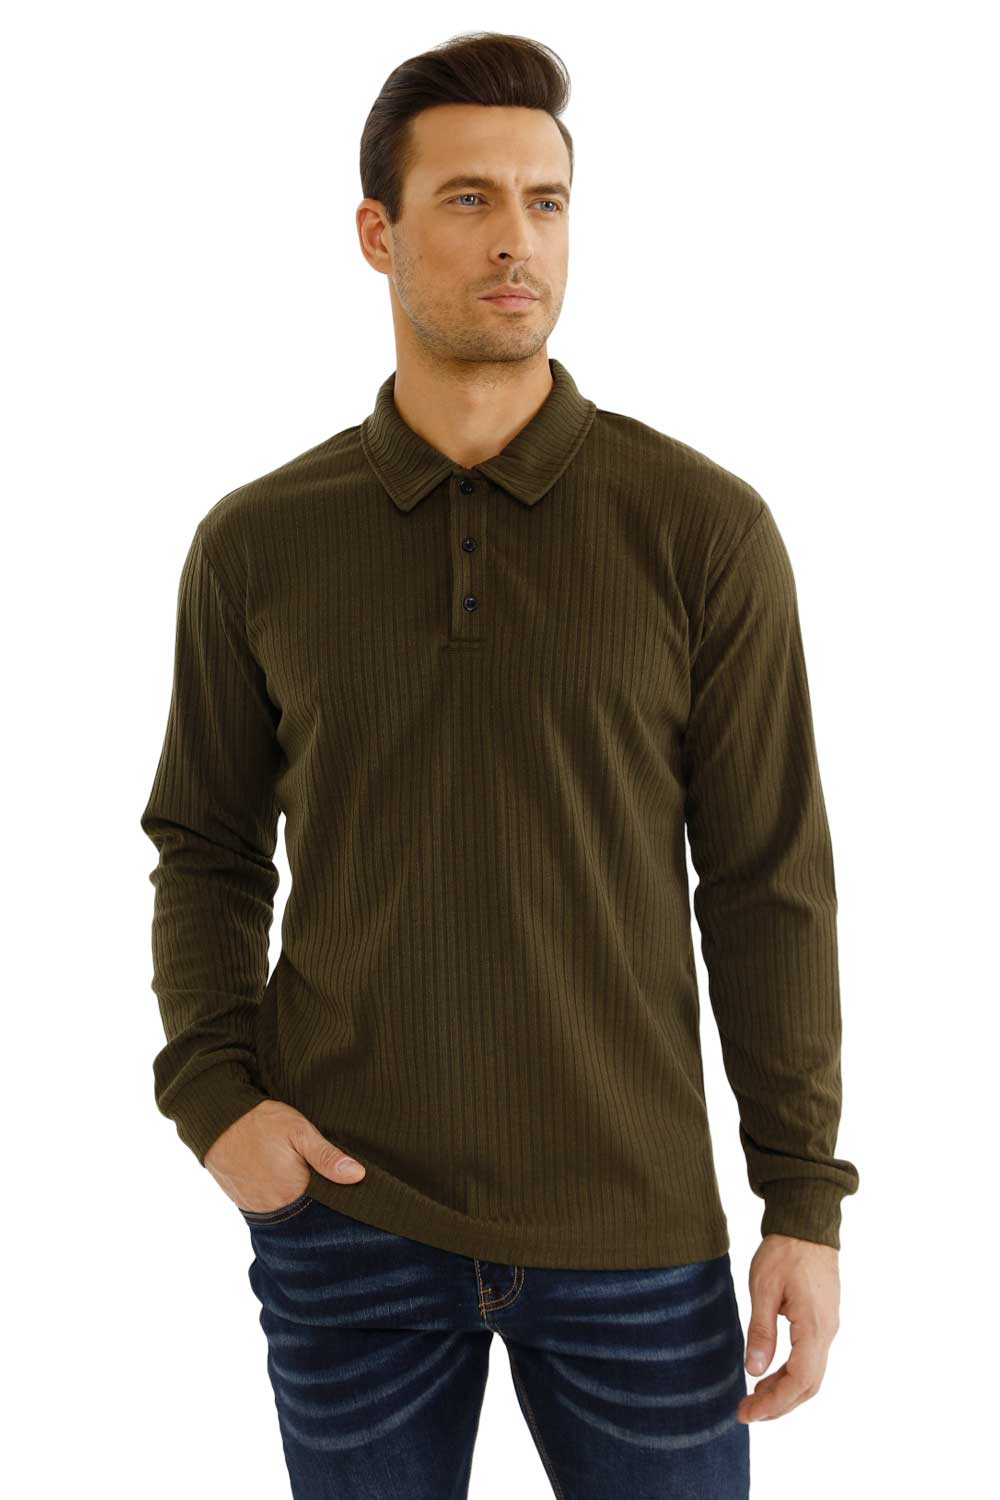 long sleeve polo shirts for men